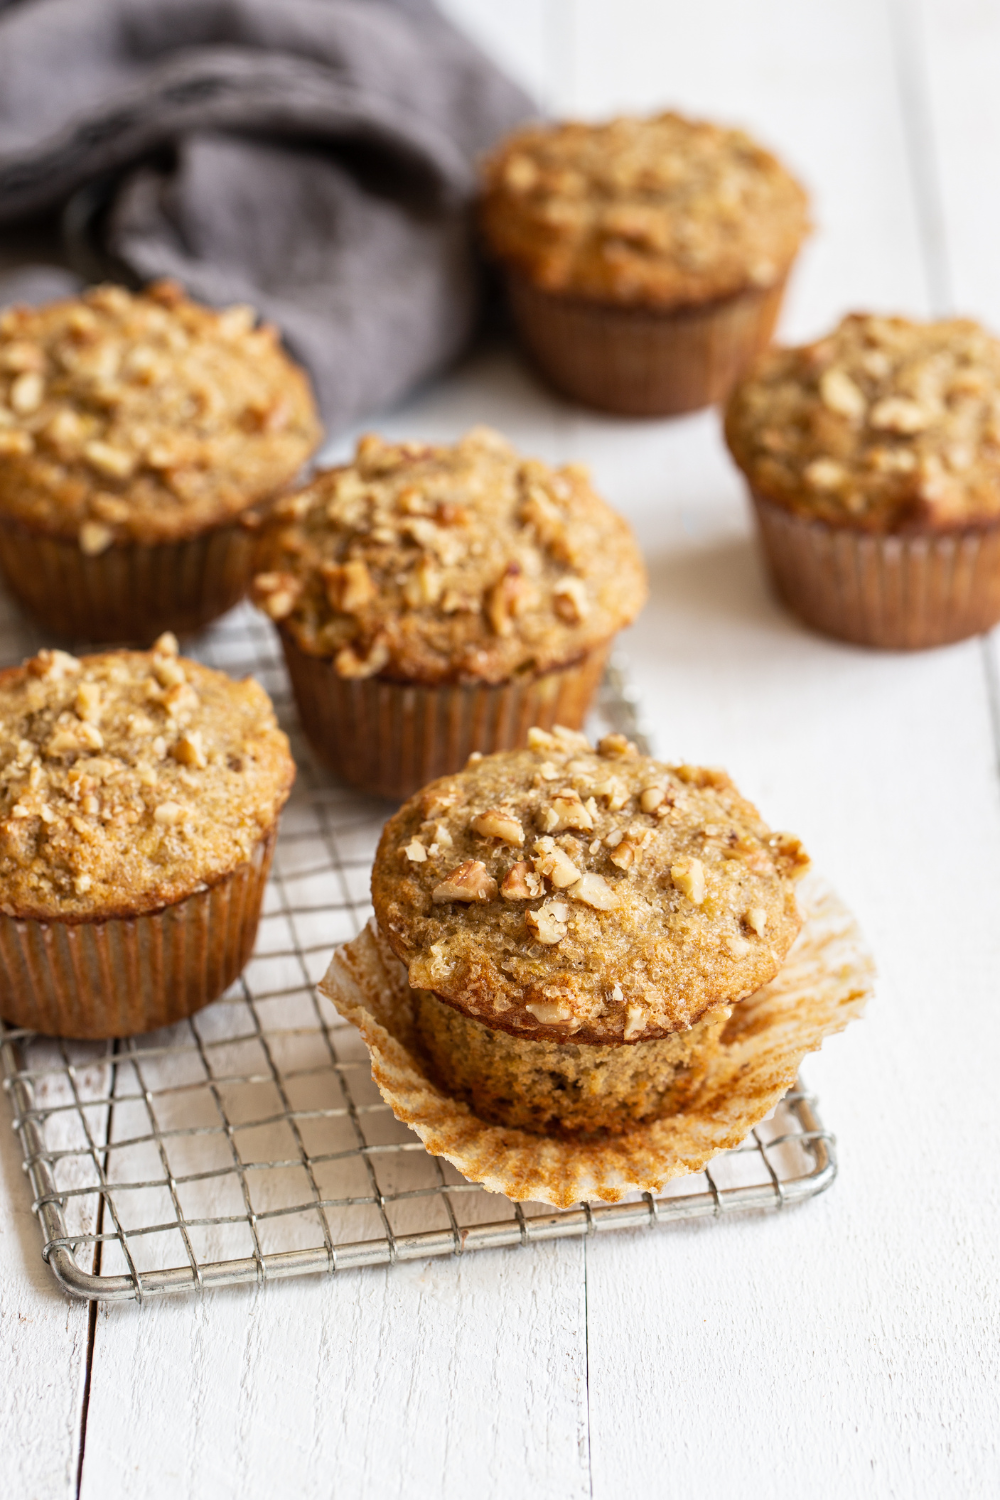 banana nut muffins cooling on a rack, ready to be enjoyed!